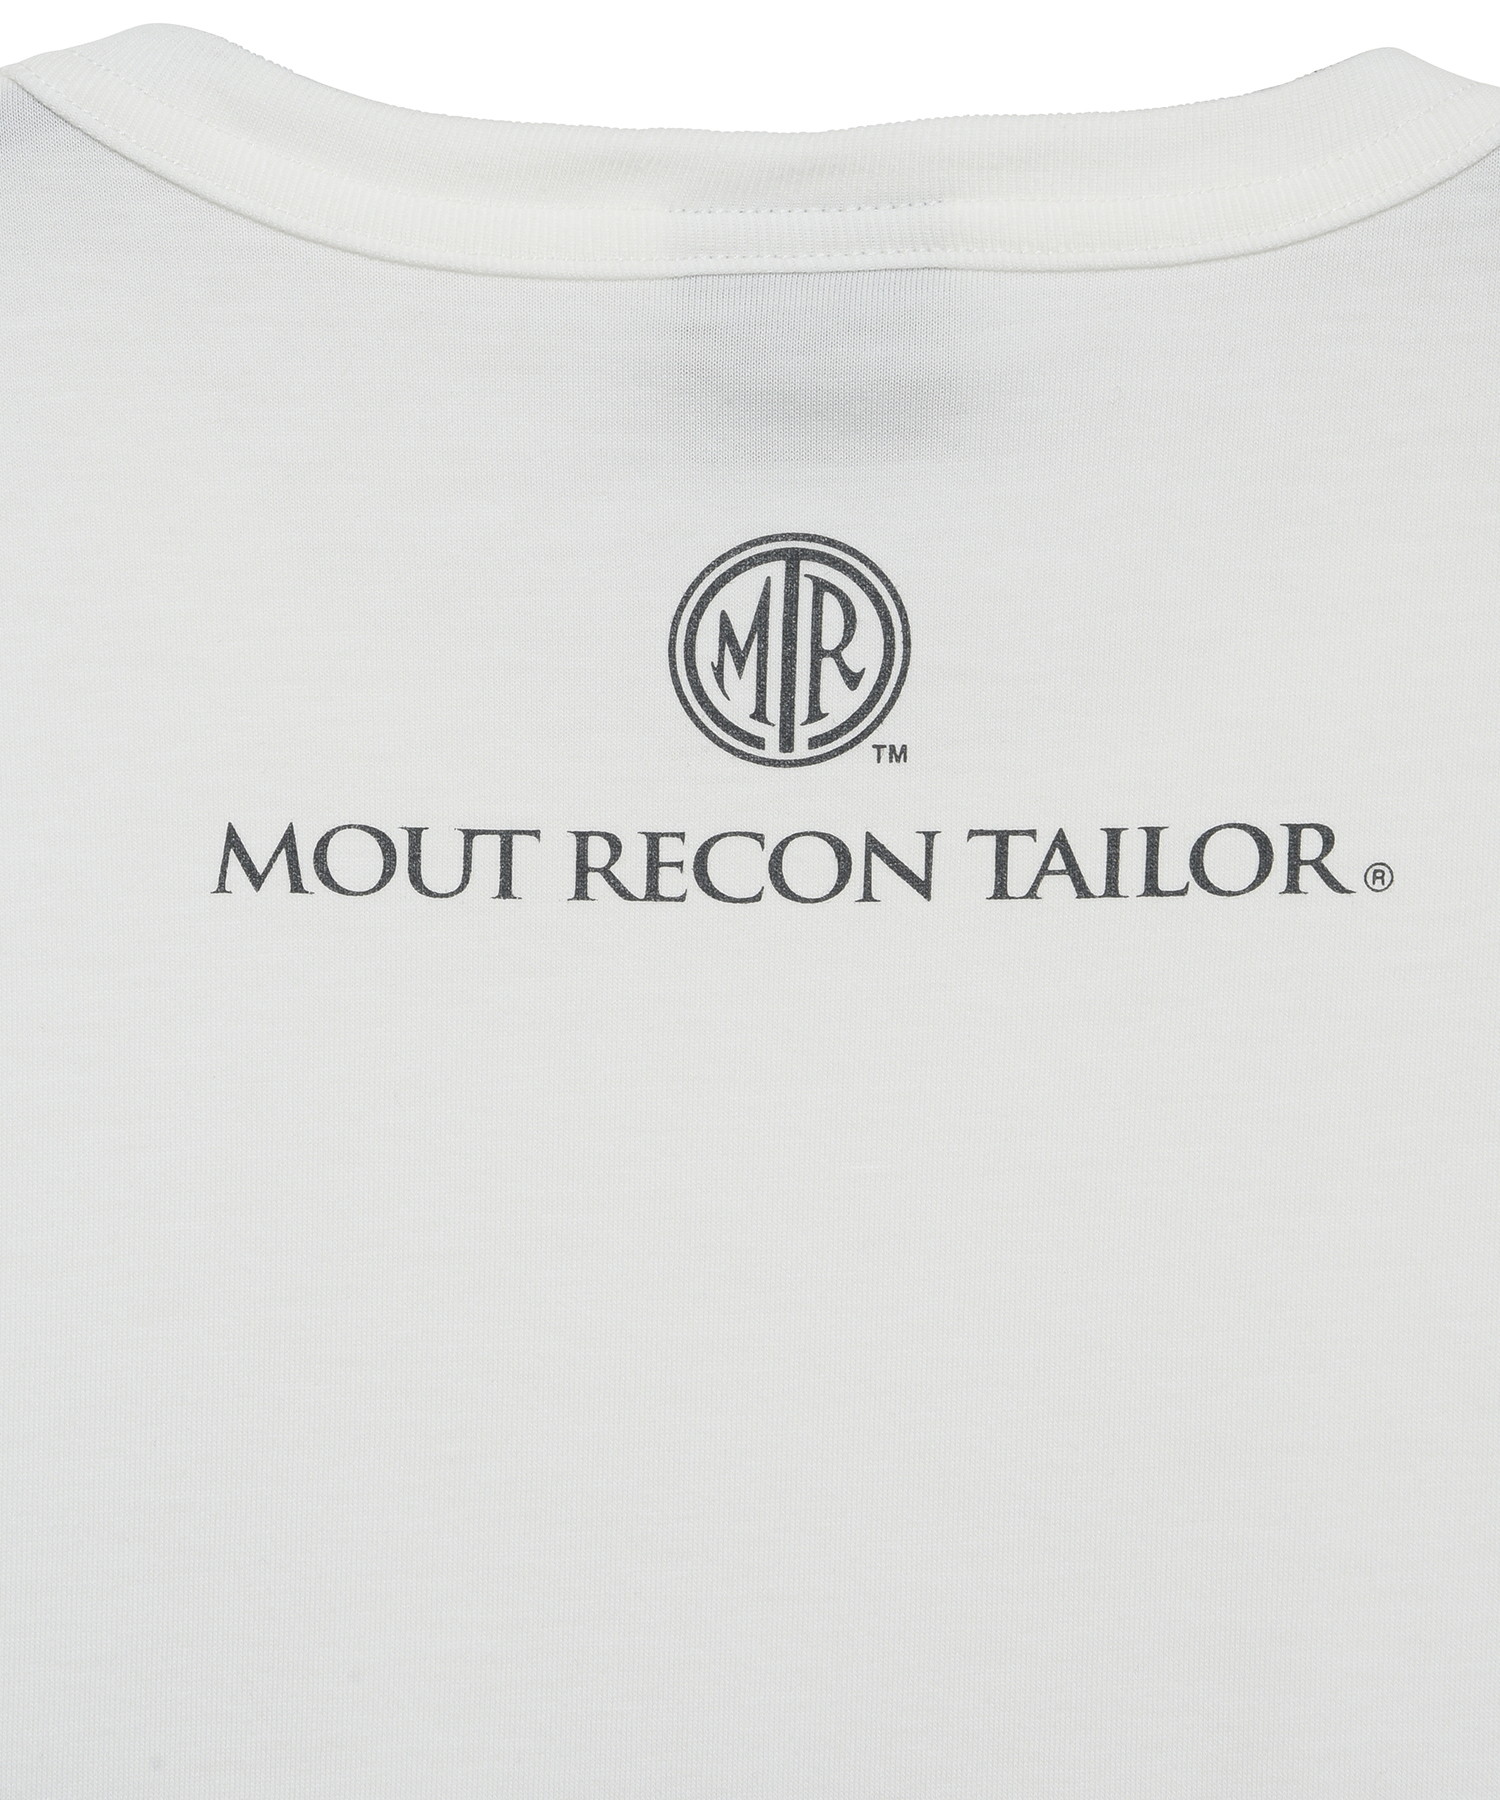 MOUT RECON TAILOR Logo T-shirts 46 Tシャツ - Tシャツ/カットソー ...